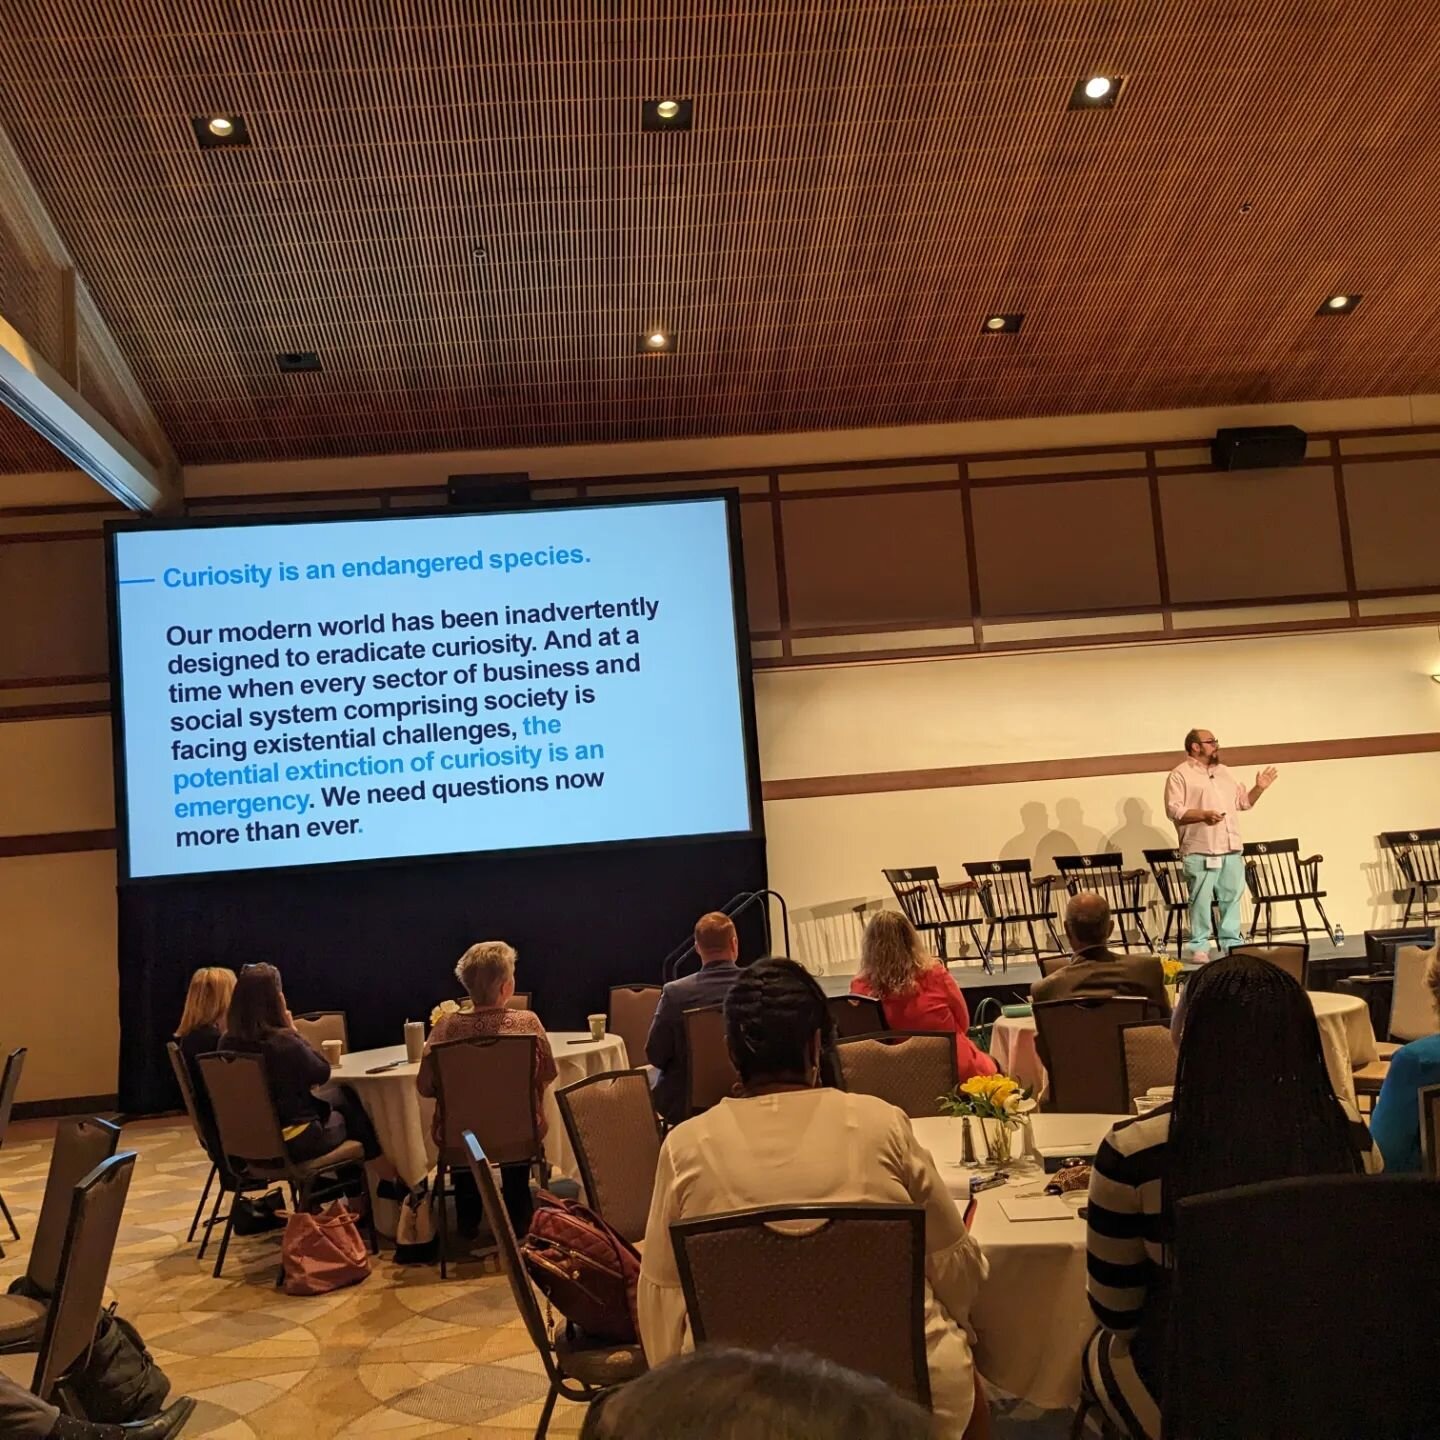 The HFHK Team had such a great day yesterday at the @de_nonprofit #ImpactDE2023 conference yesterday where keynote @goldenbergseth talked about using design thinking in nonprofit work. It was fascinating and inspiring!

Then we toured @odyessycharter